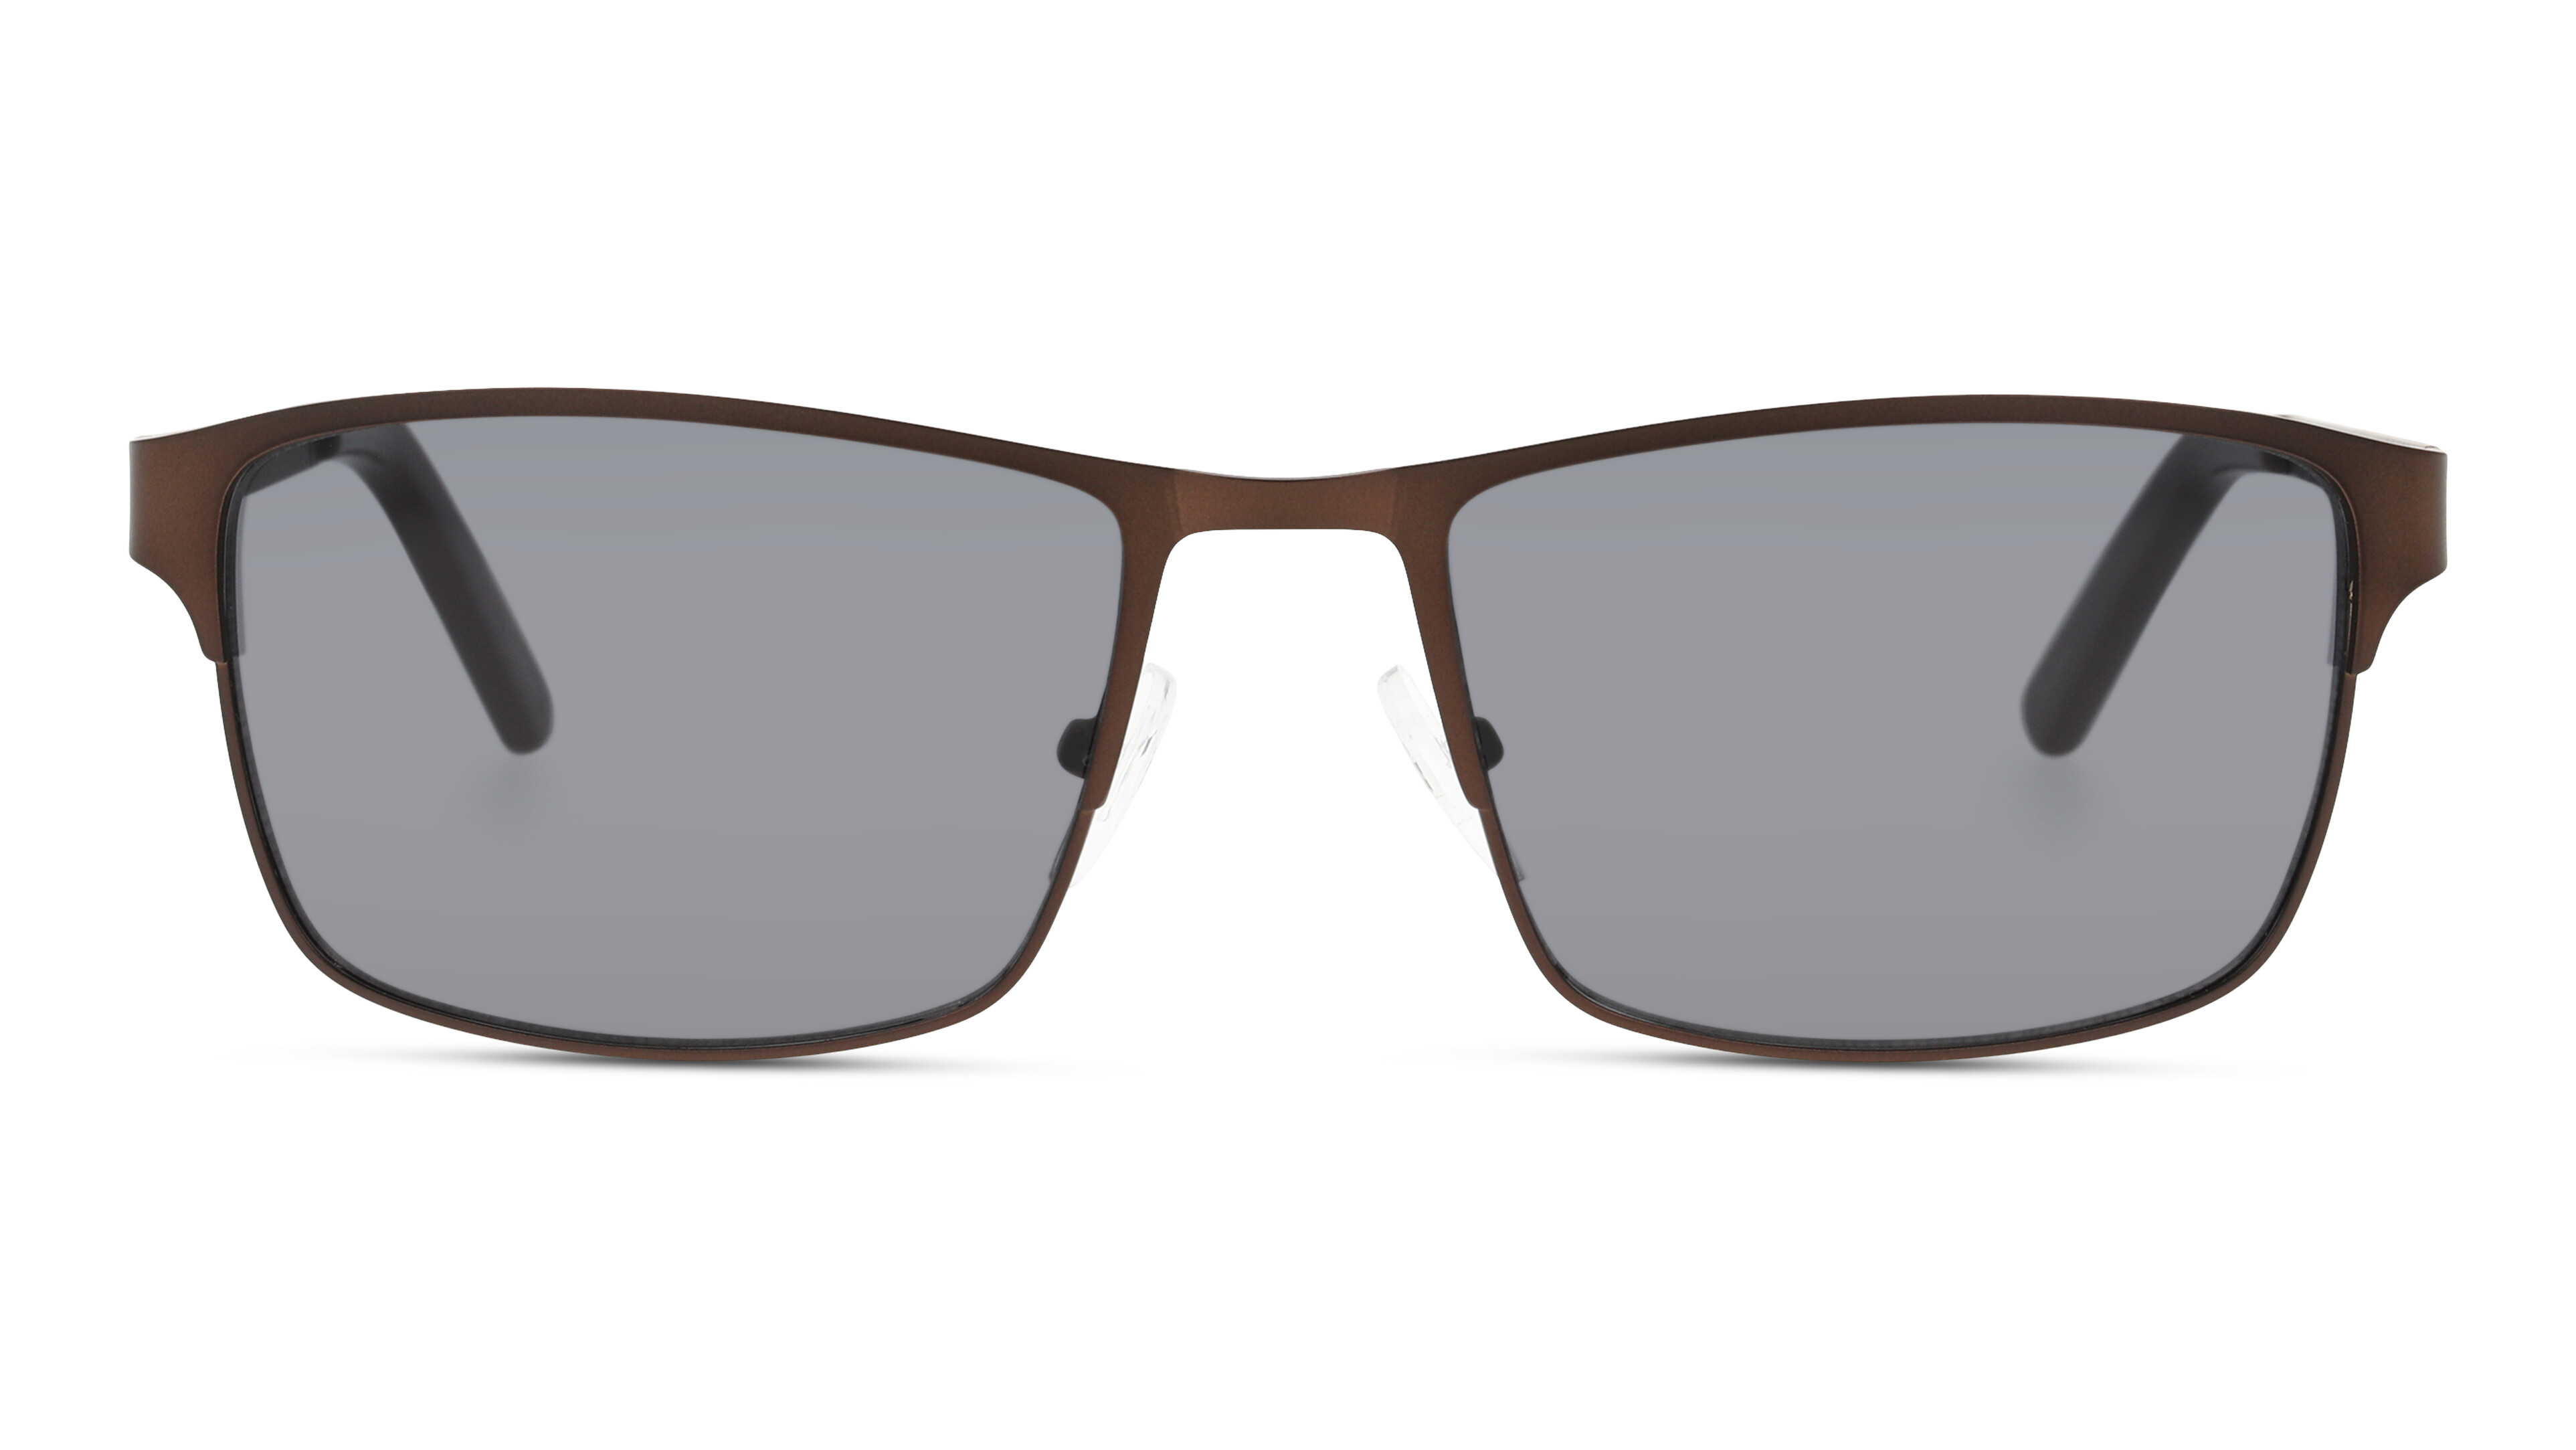 [products.image.front] Seen SNSM0010 NNG0 Sonnenbrille